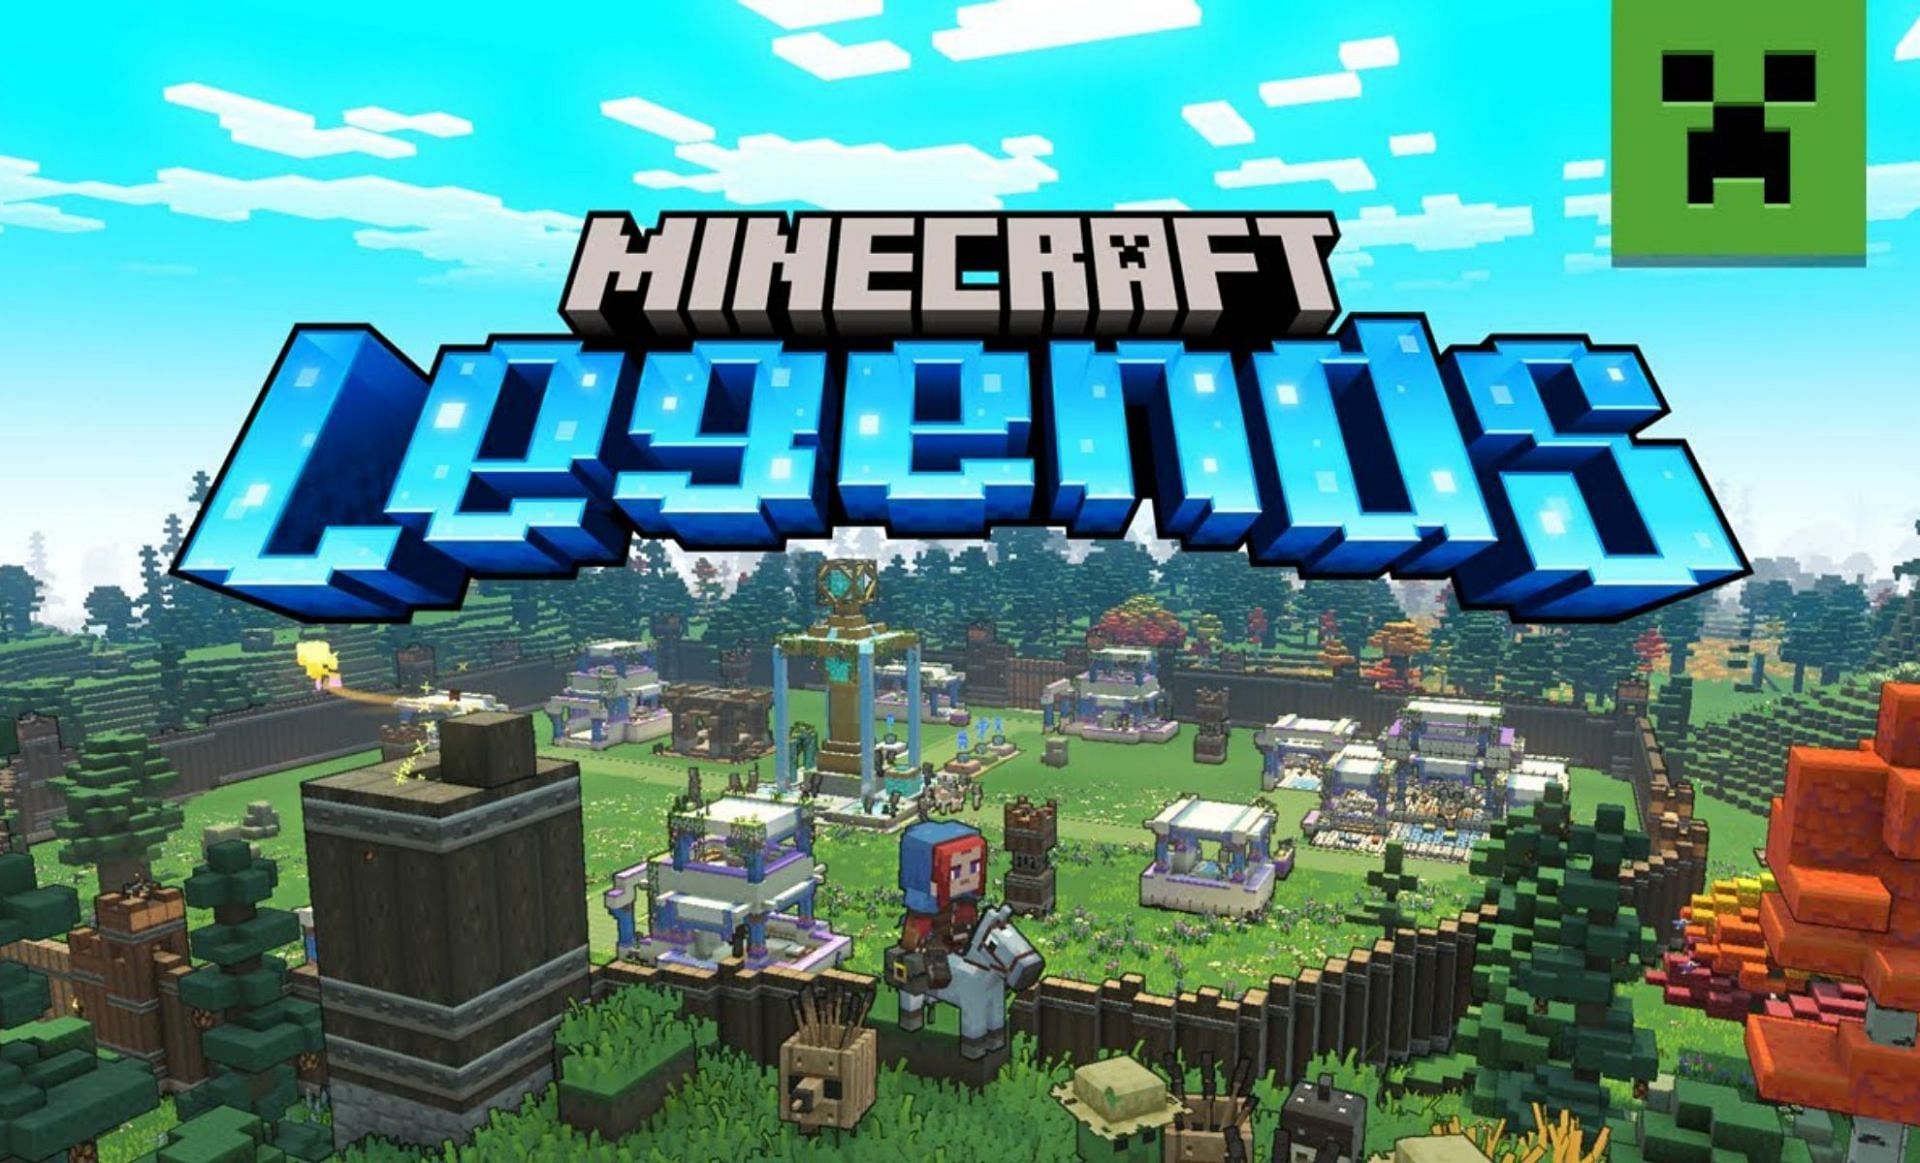 Minecraft Legends is coming soon (Image via Minecraft on YouTube)